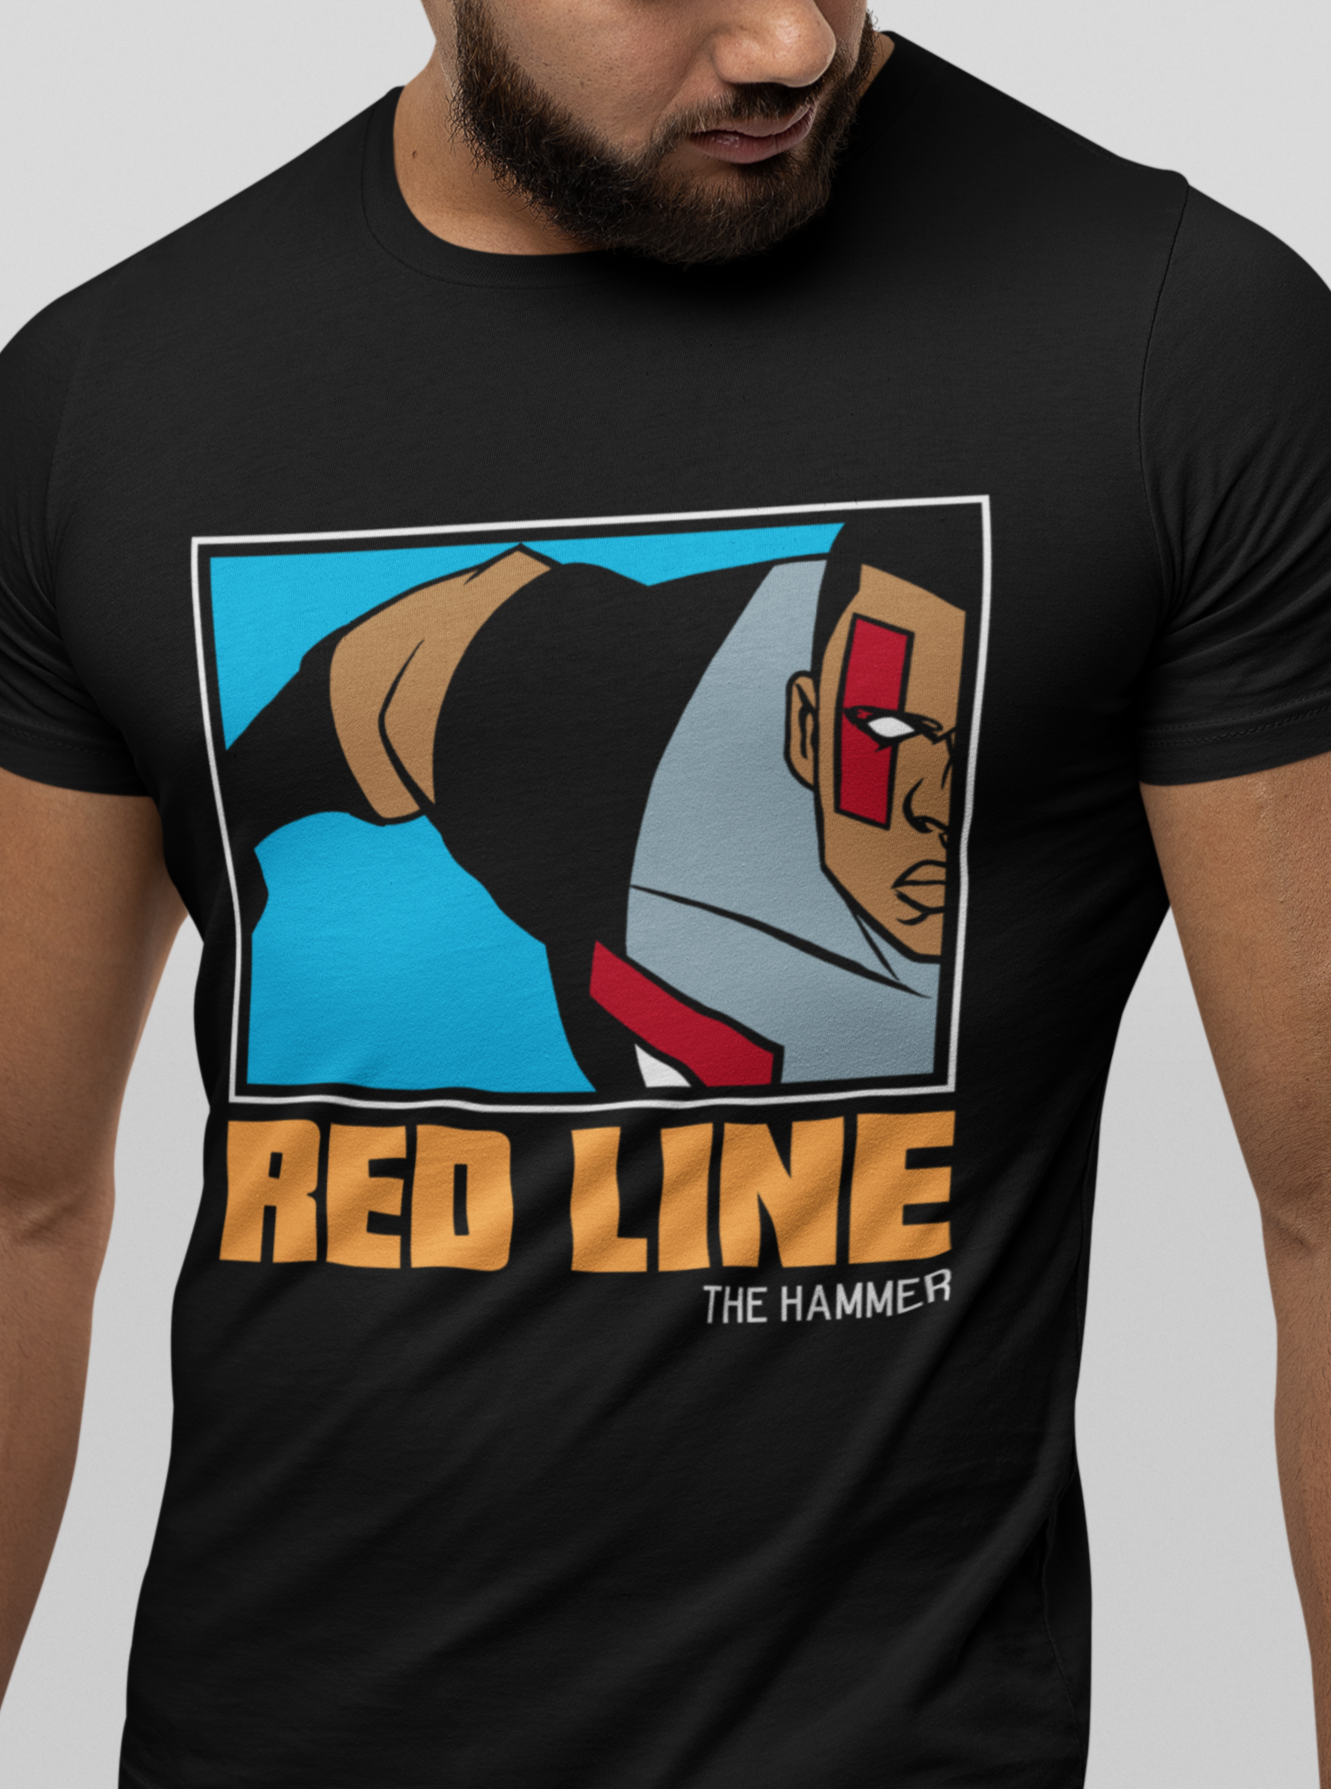 RED LINE (THE HAMMER) T-Shirt